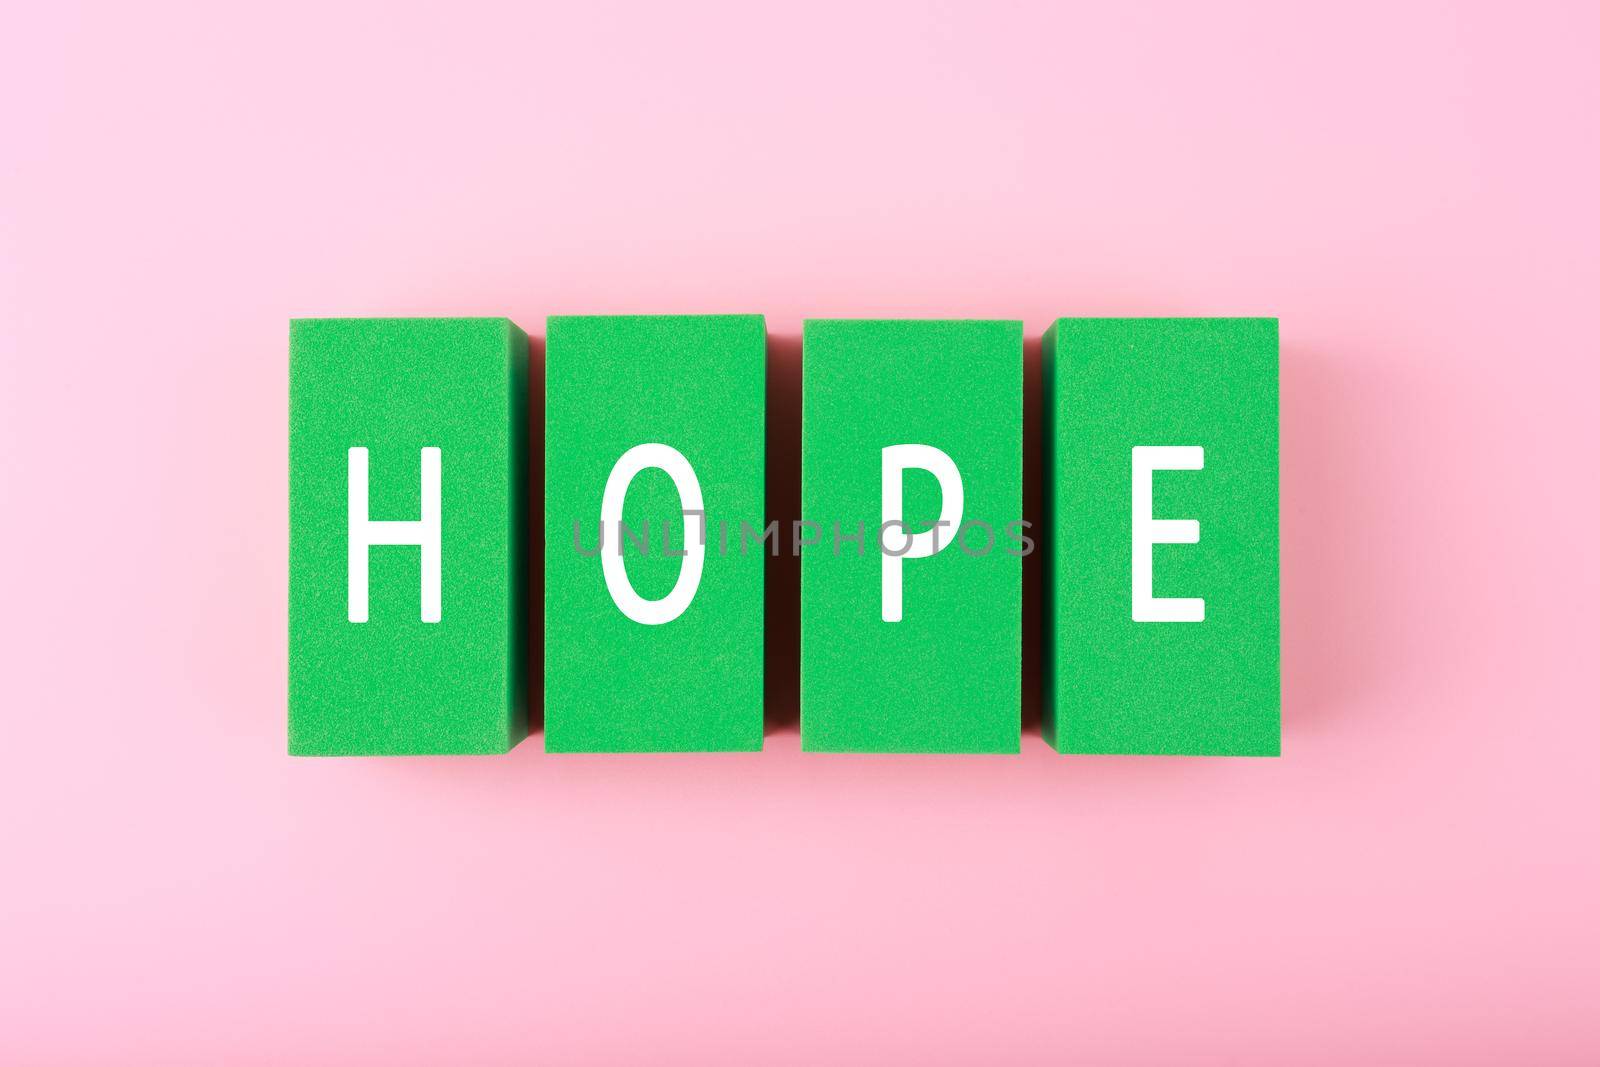 Concept of hope and faith. Minimal flat lay with hope single word written on green blocks against bright pink background. 